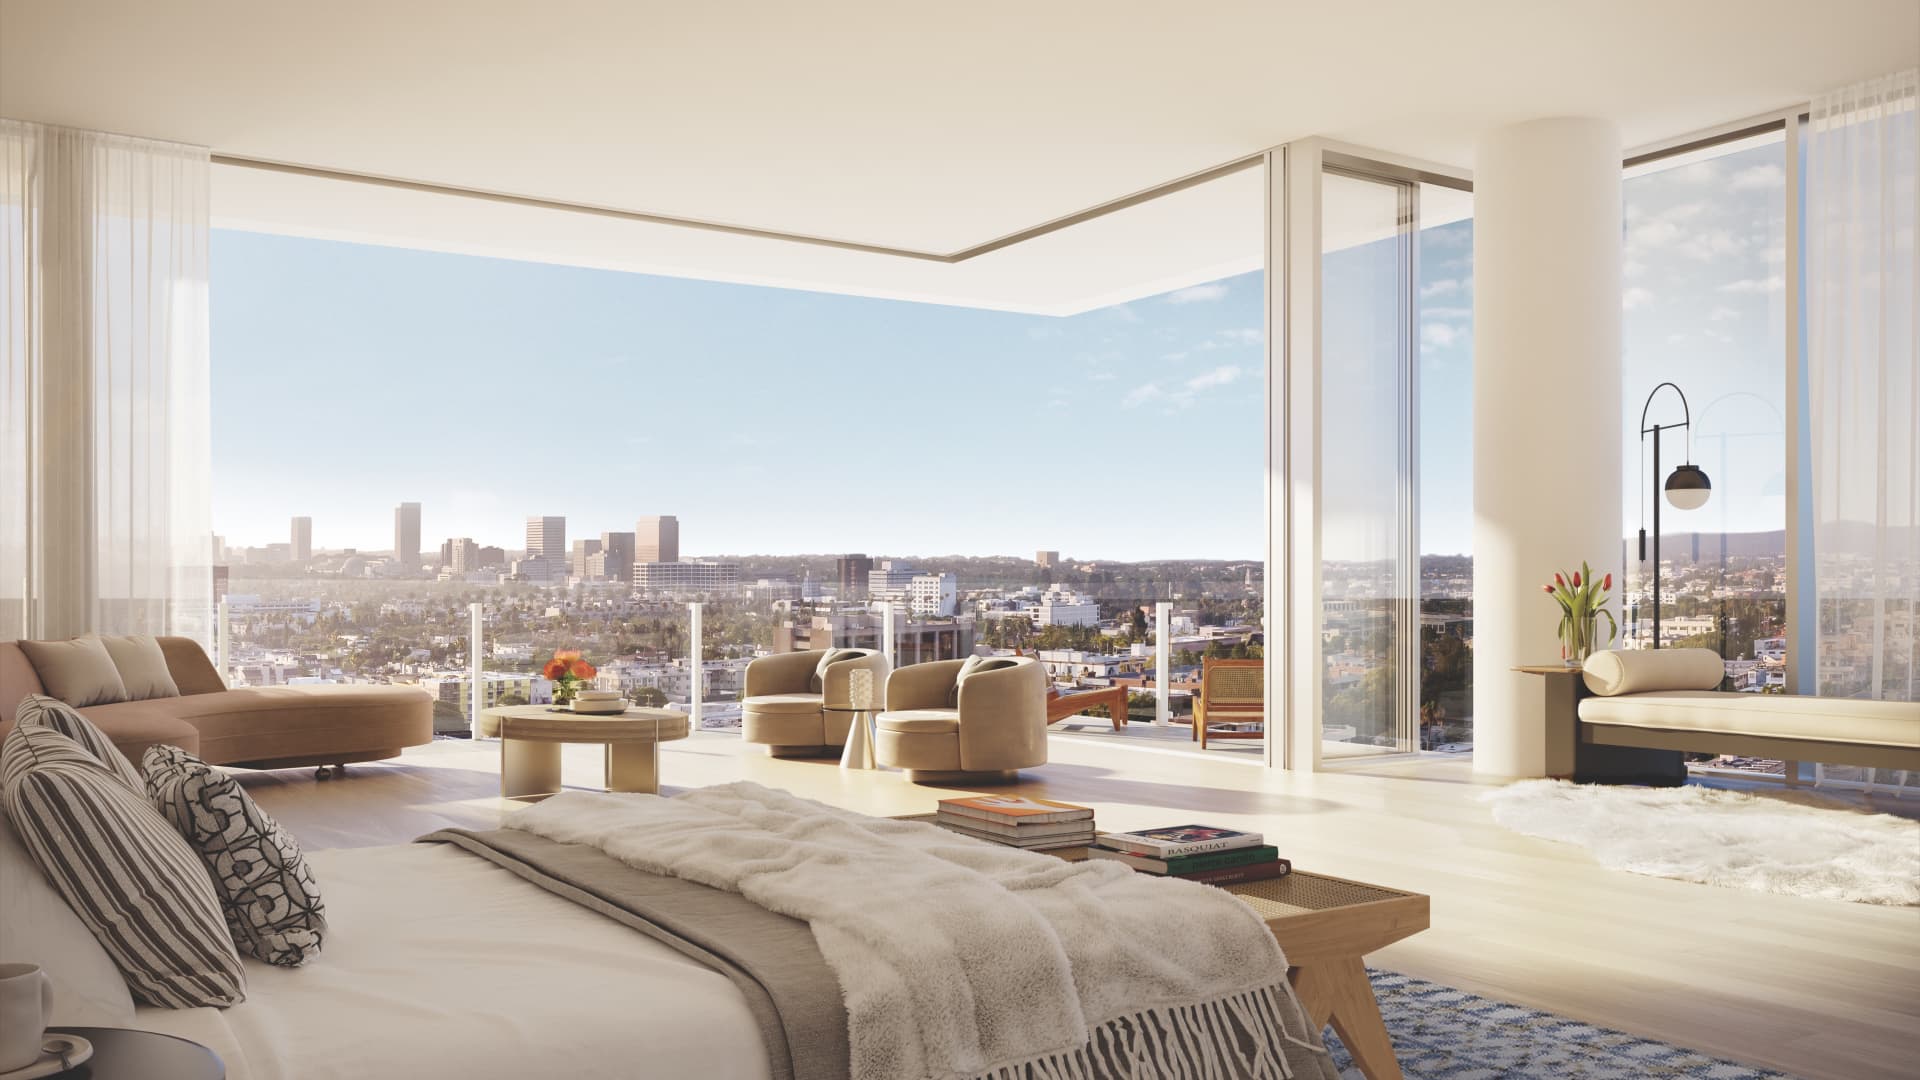 Rendering of the primary bedroom at the penthouse known as ONE LA.